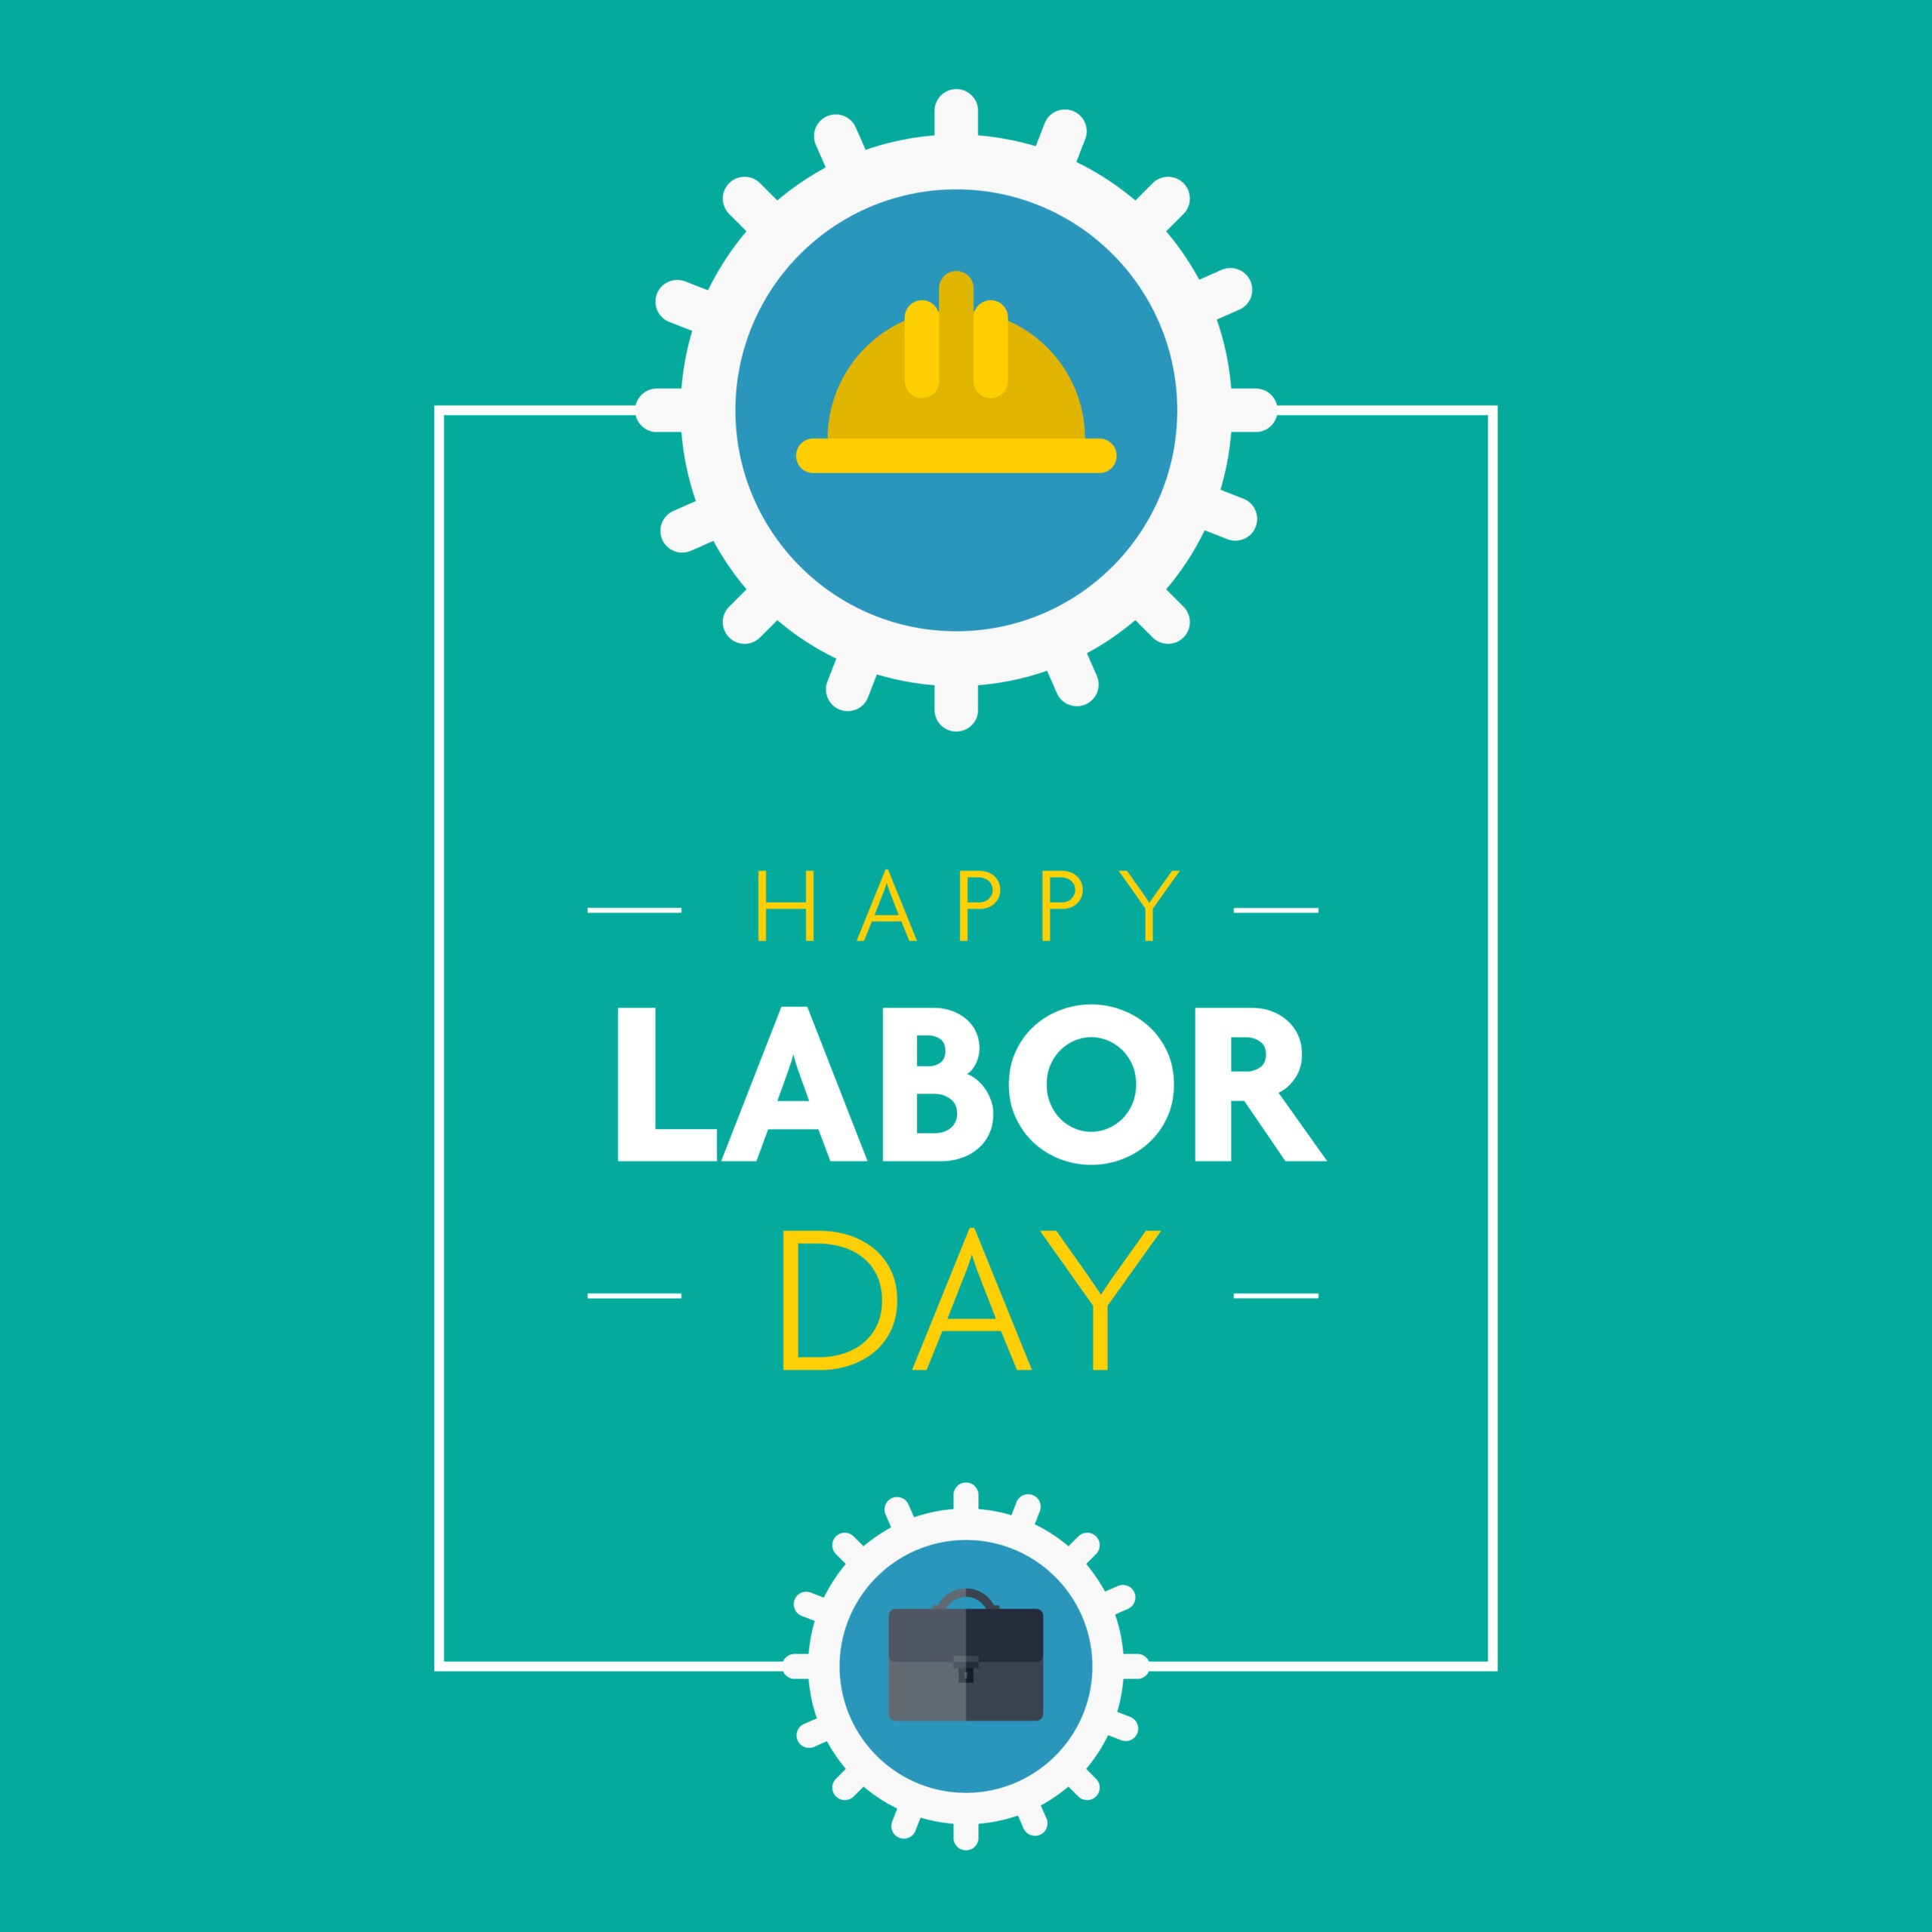 Happy Labor Day from DCTA!